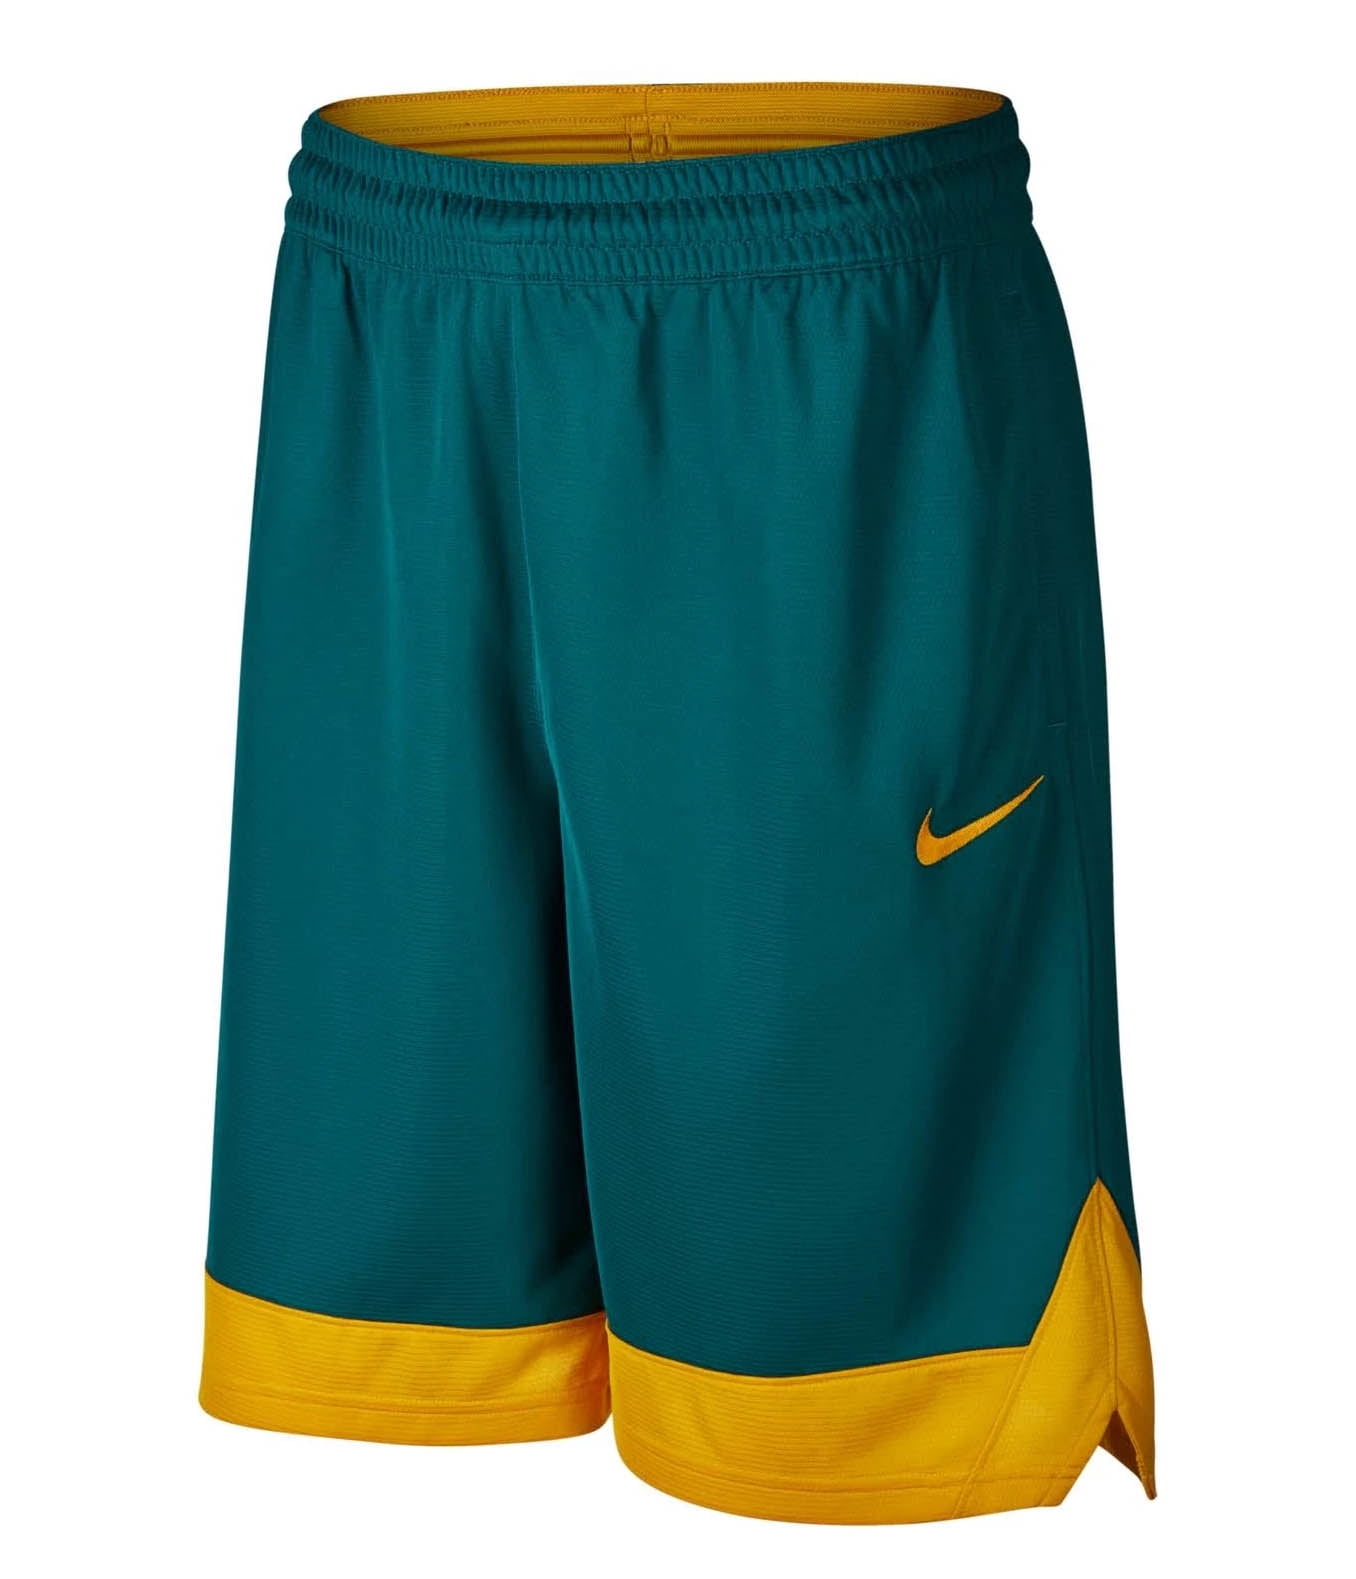 Nike Men's Dri-Fit Icon Basketball Shorts (Teal/Sulfer, Small ...